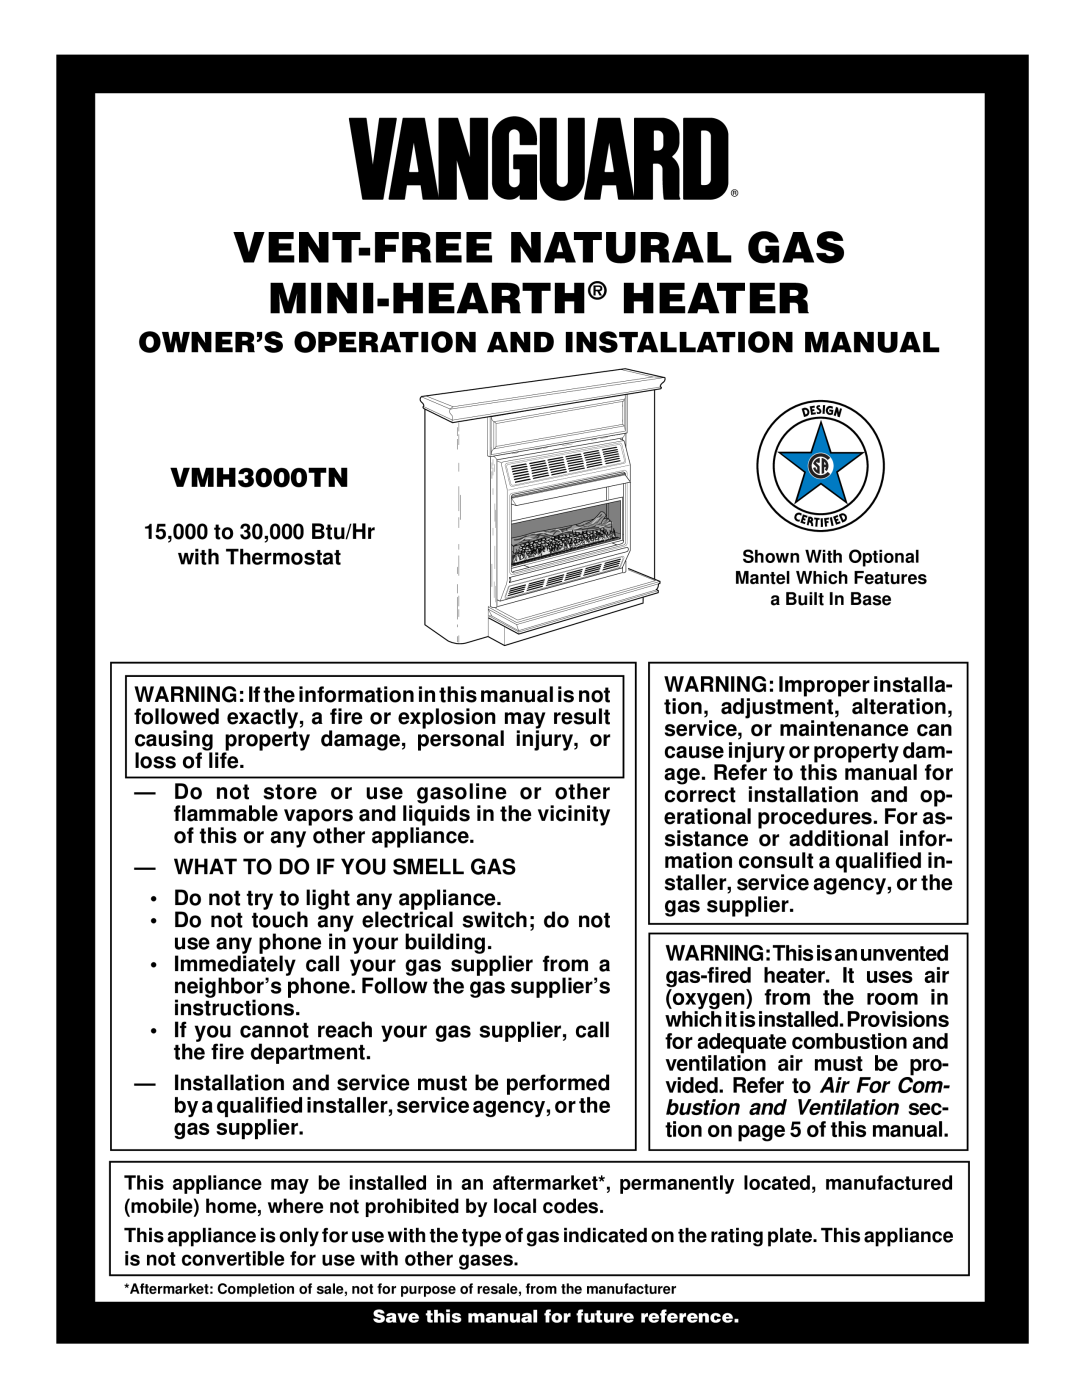 Vanguard Heating VMH3000TN installation manual Owner’S Operation And Installation Manual, What To Do If You Smell Gas 